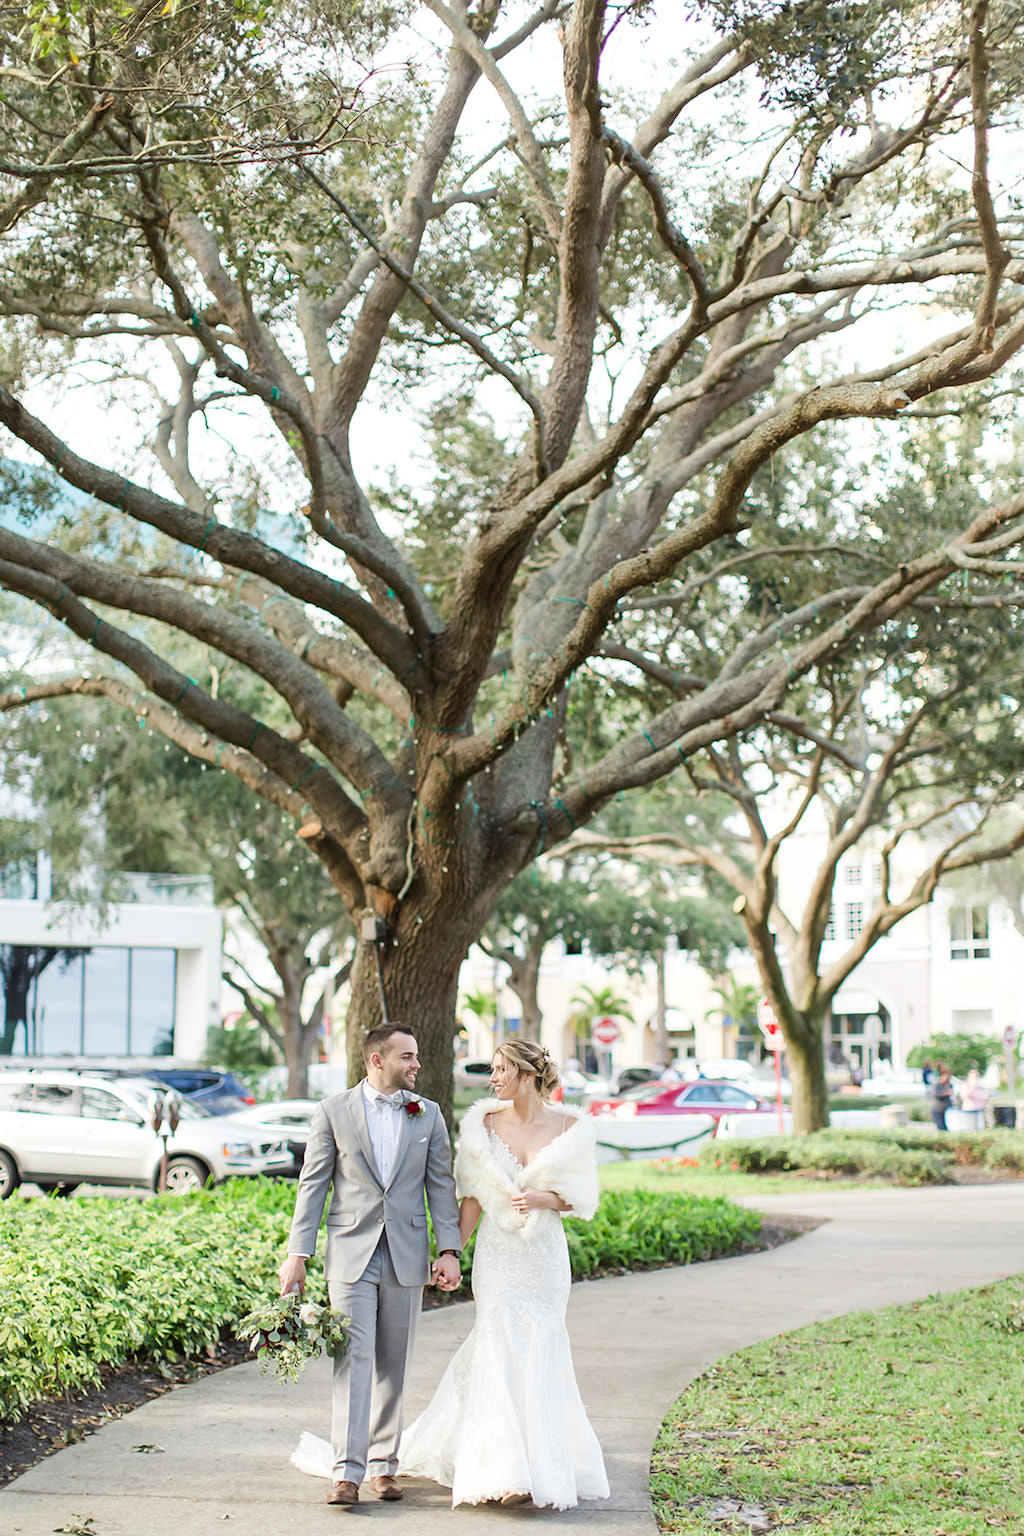 Downtown St. Pete Bride and Groom, Romantic Winter Walk in Straub Park at Christmas | Tampa Bay Luxury Wedding Photographers Shauna and Jordon Photography